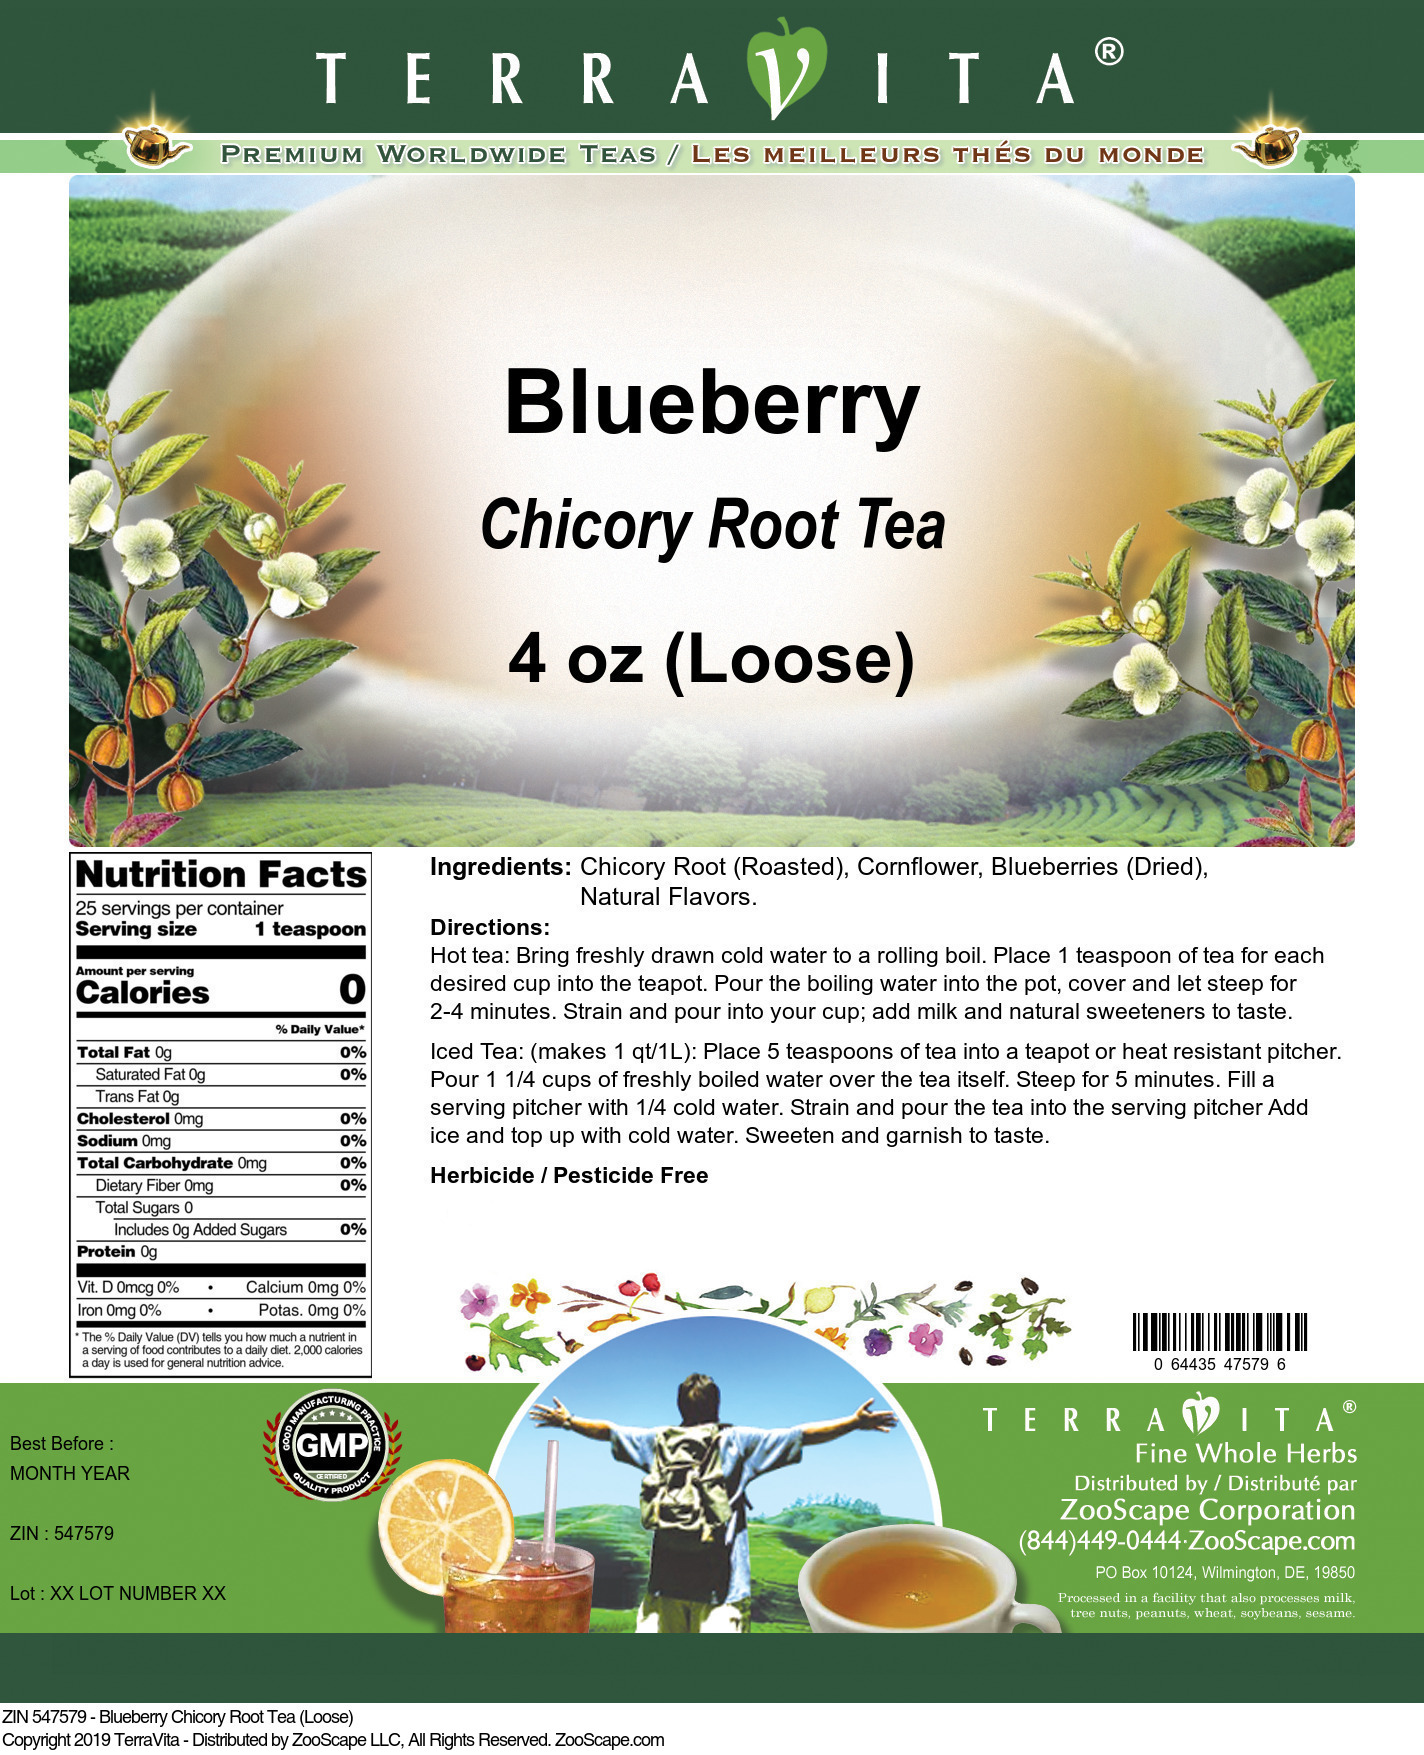 Blueberry Chicory Root Tea (Loose) - Label